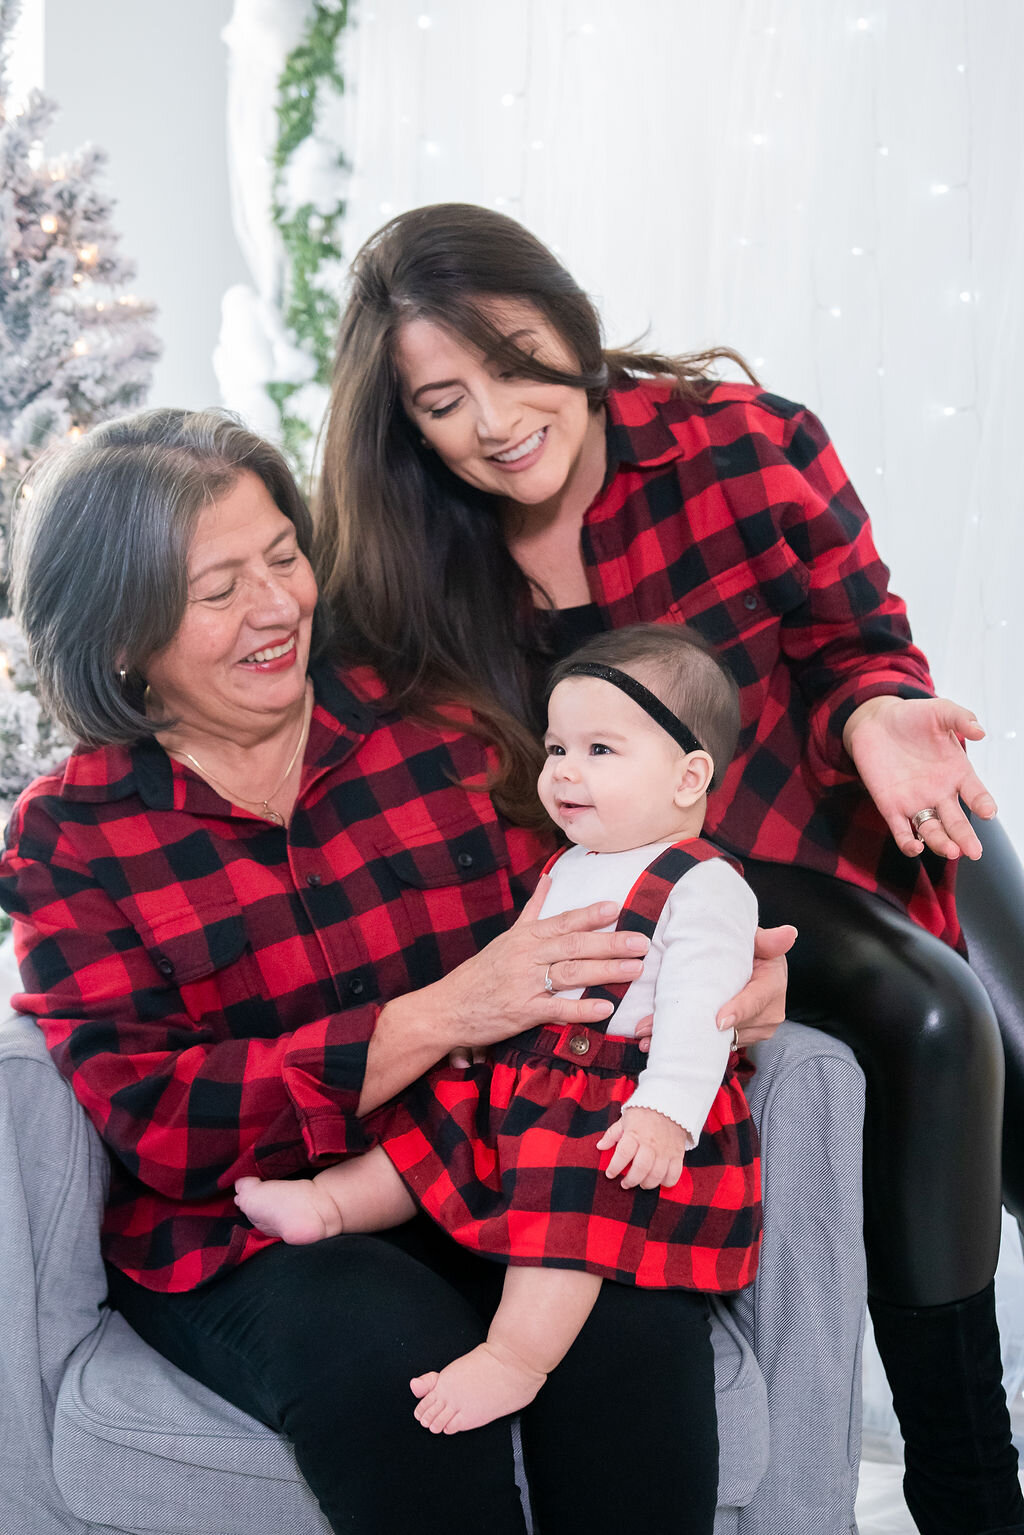 mother-and-daughter-family-pictures, generation-pictures, multi-generational-pictures, holiday-family-picture-ideas